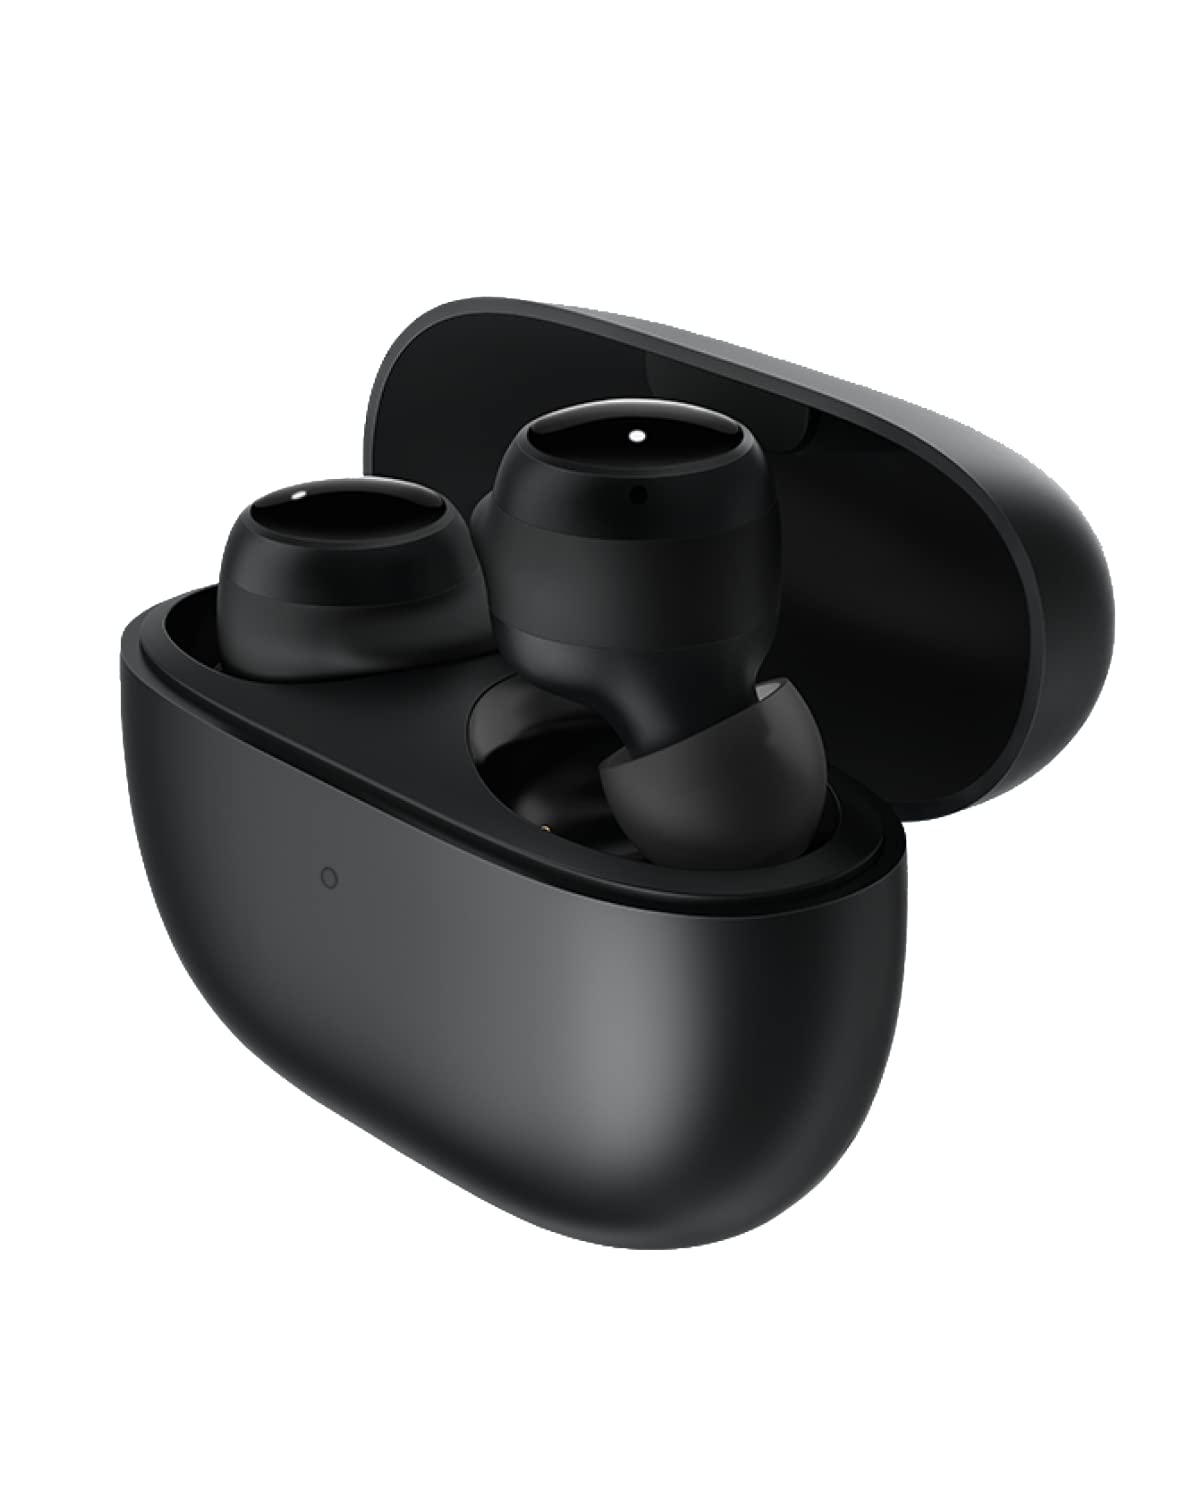 Xiaomi True Wireless Earbuds Redmi Buds 3 lite, Bluetooth 5.2 Low Latency Headphones Waterproof Stereo Earphones in Ear Touch Control Headset with Mic Deep Bass for Sport, Gaming and Running, Black